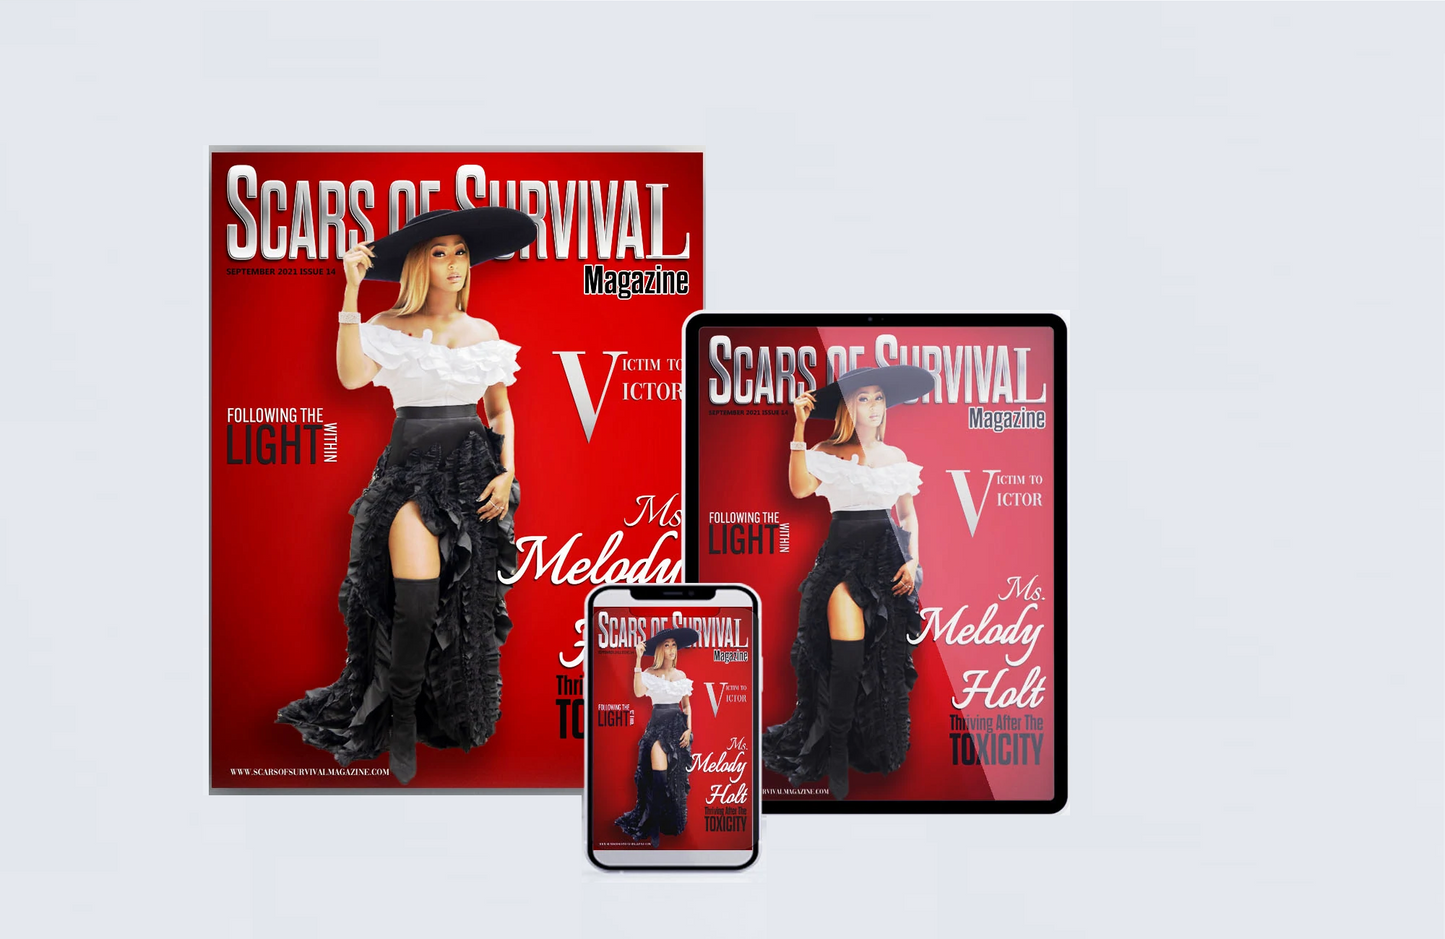 You've selected 6 Month of Scars of Survival Magazine for FREE